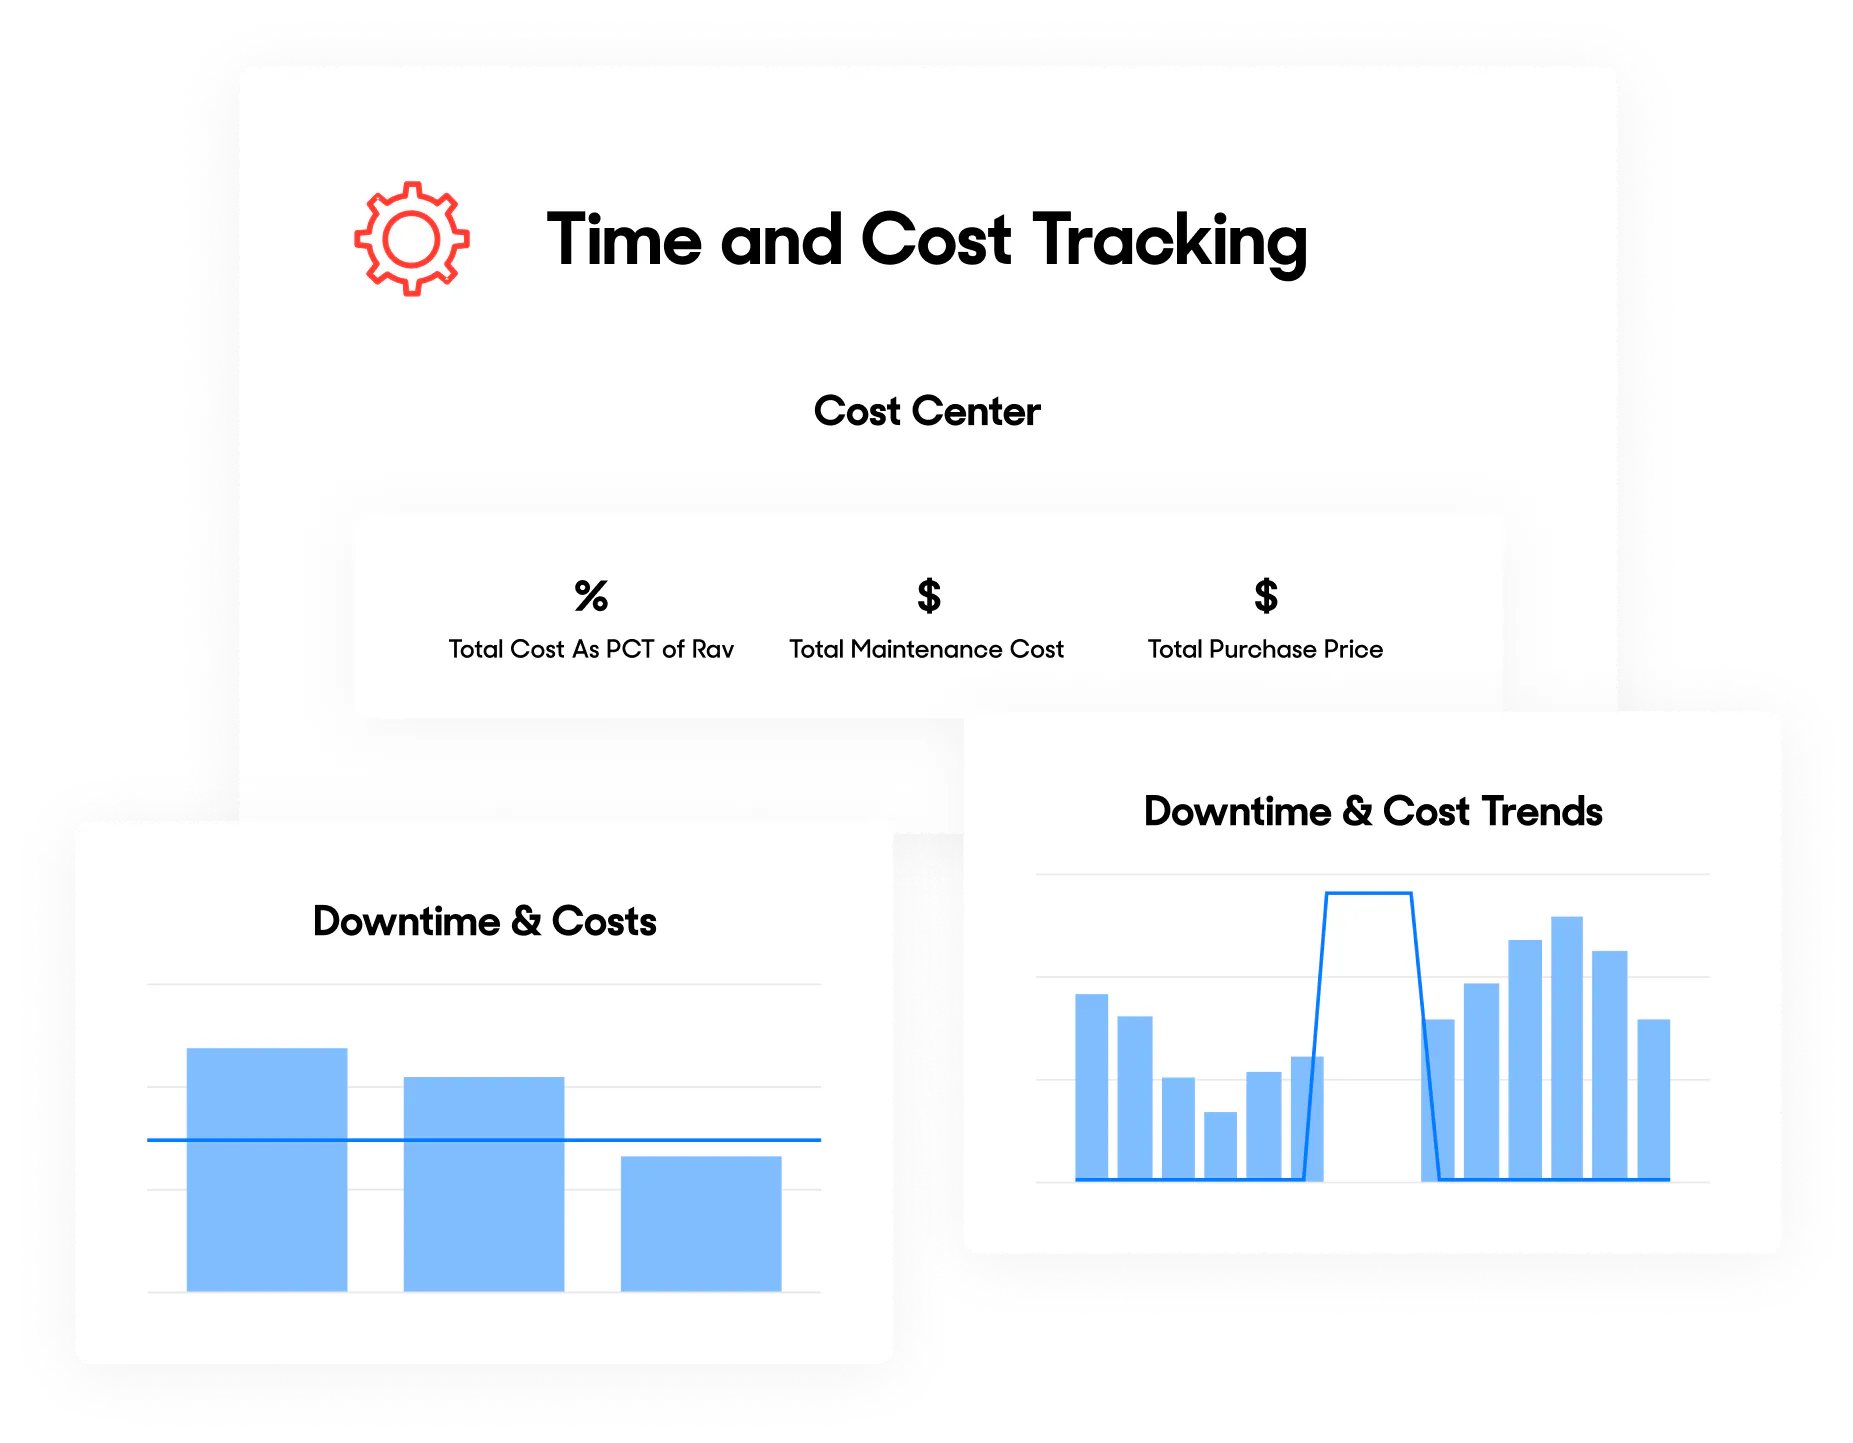 Time and Cost Tracking Illustration